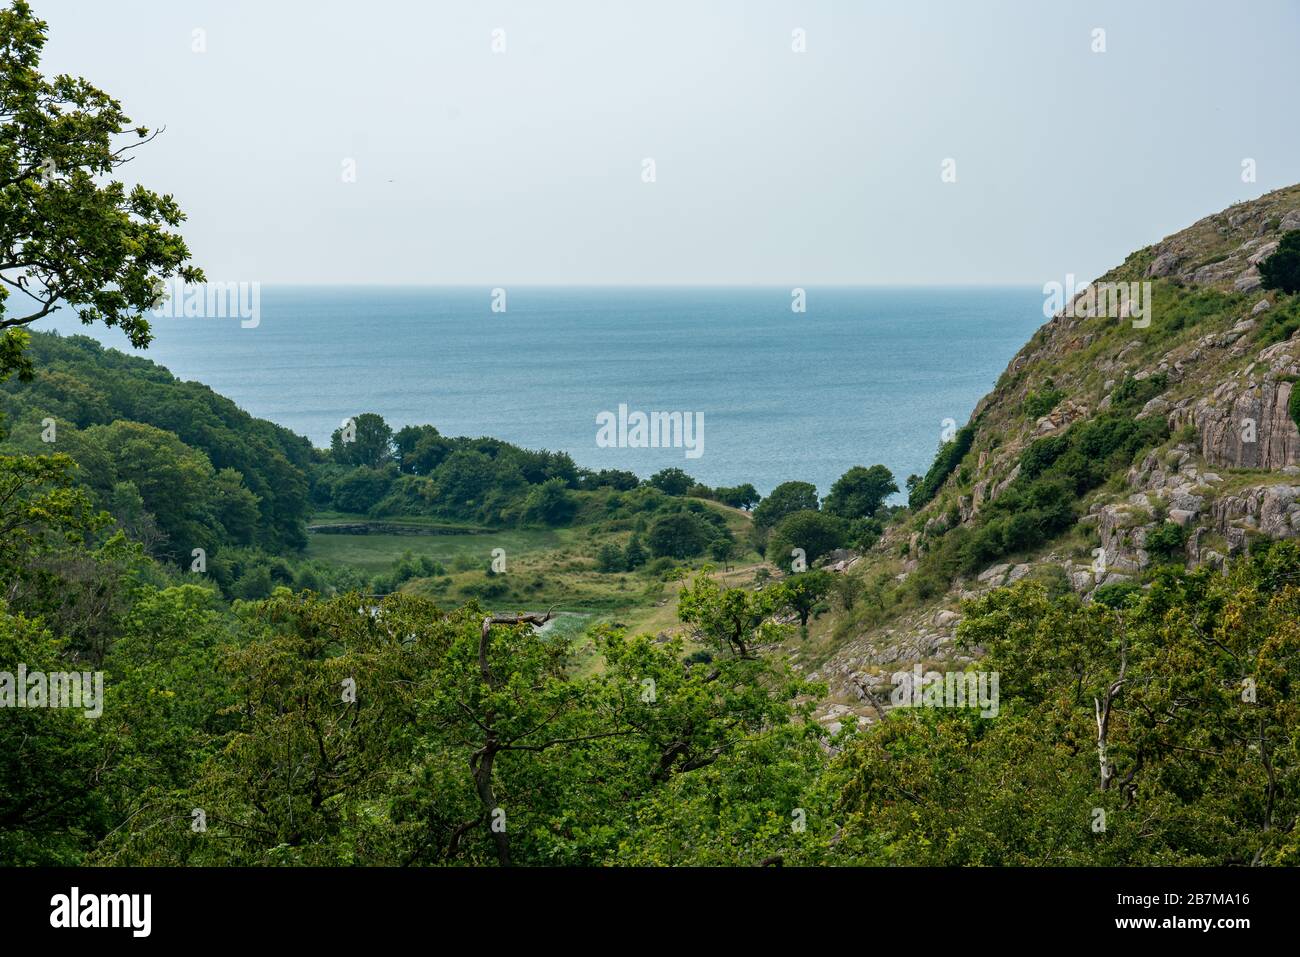 Hammershus, Bornholm / Denmark - July 29 2019: Valley with Baltic Sea in the back. Stock Photo